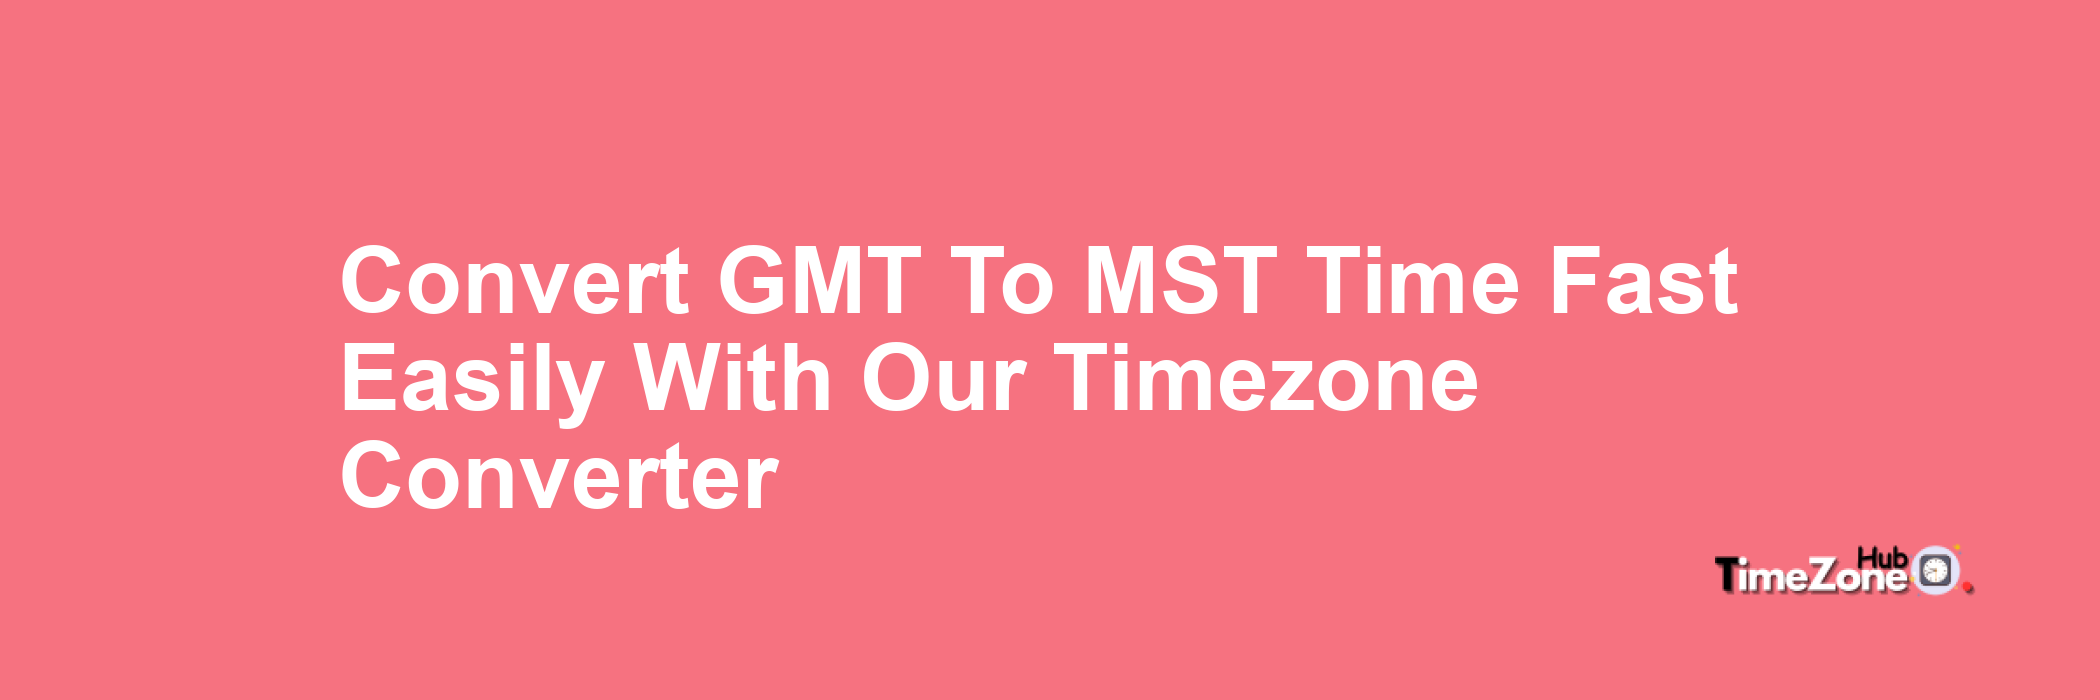 GMT to MST